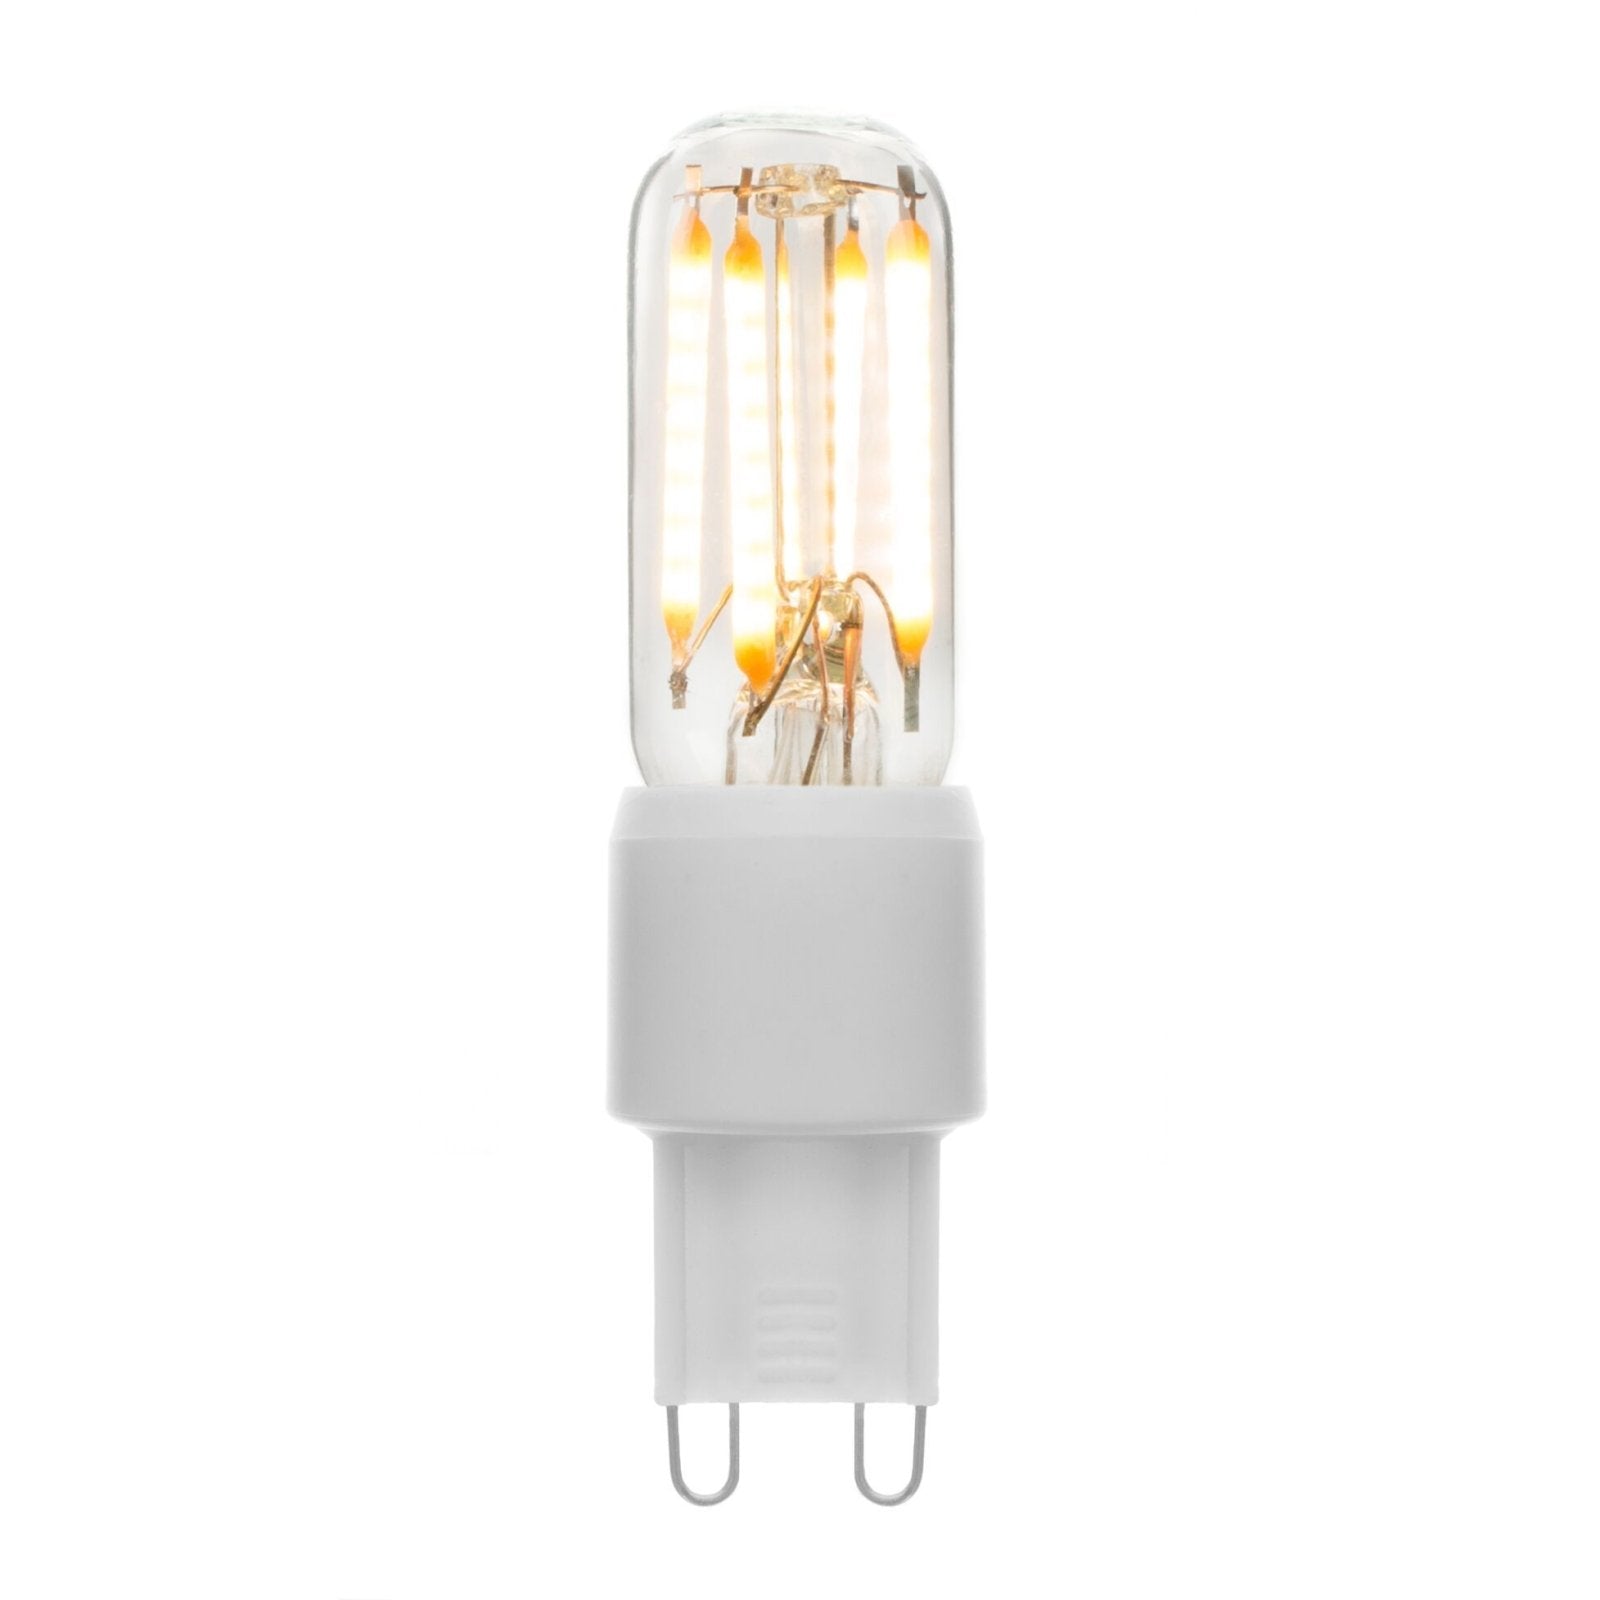 G9 Clear 3W 2700K - LED Lamp from RETROLIGHT. Made by Zico Lighting.